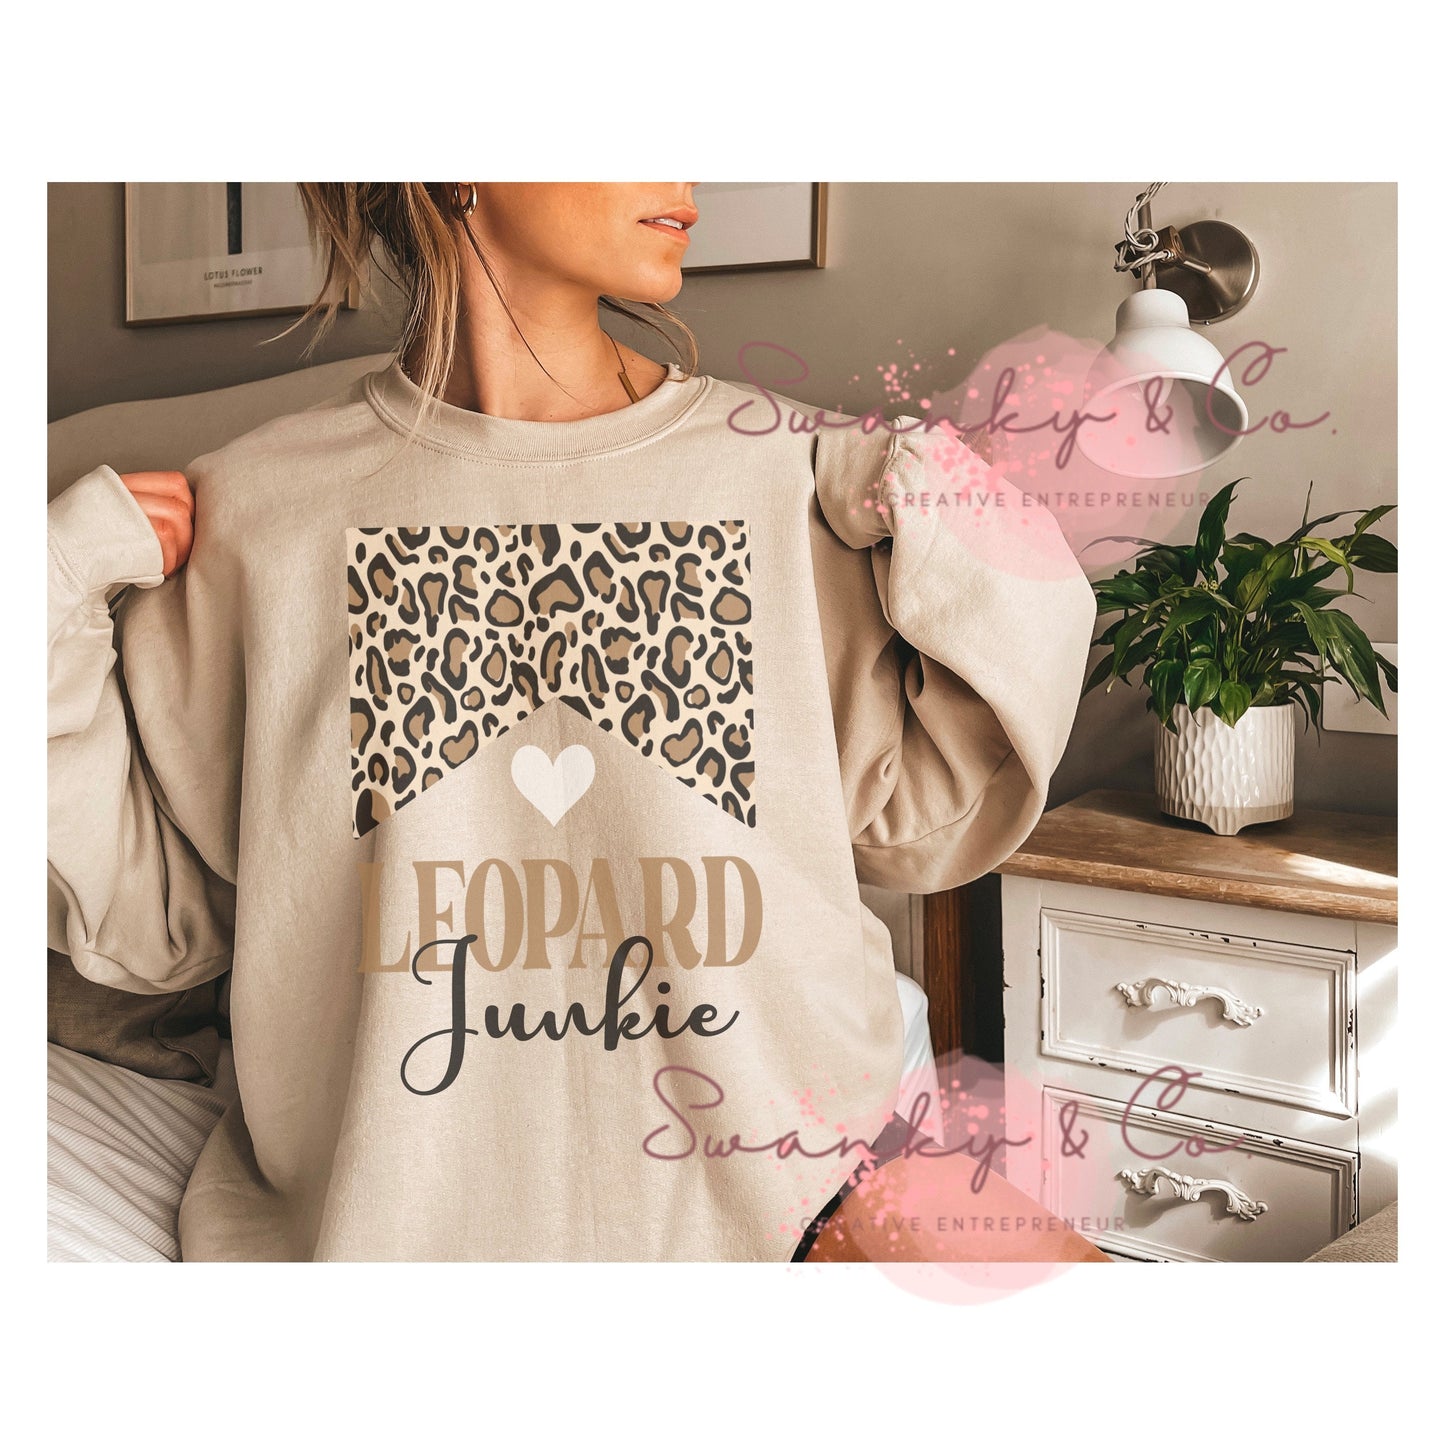 Leopard Junkie Png for Sublimation | Leopard is the new black| Malboro png| Digital Download